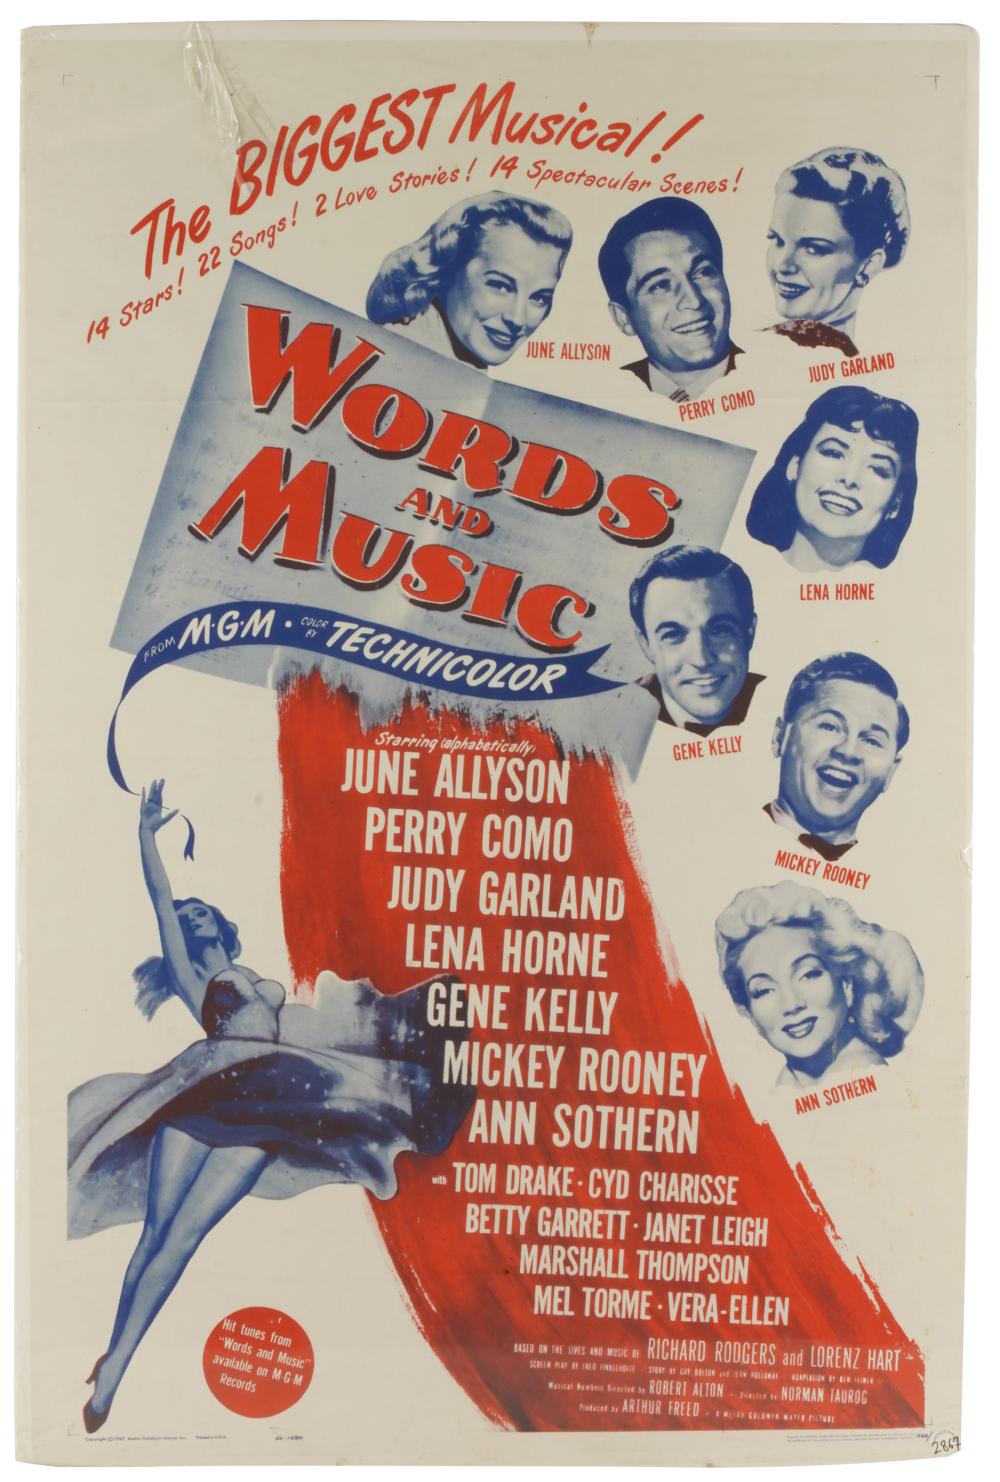  WORDS AND MUSIC MGM MOVIE POSTER1948  330873